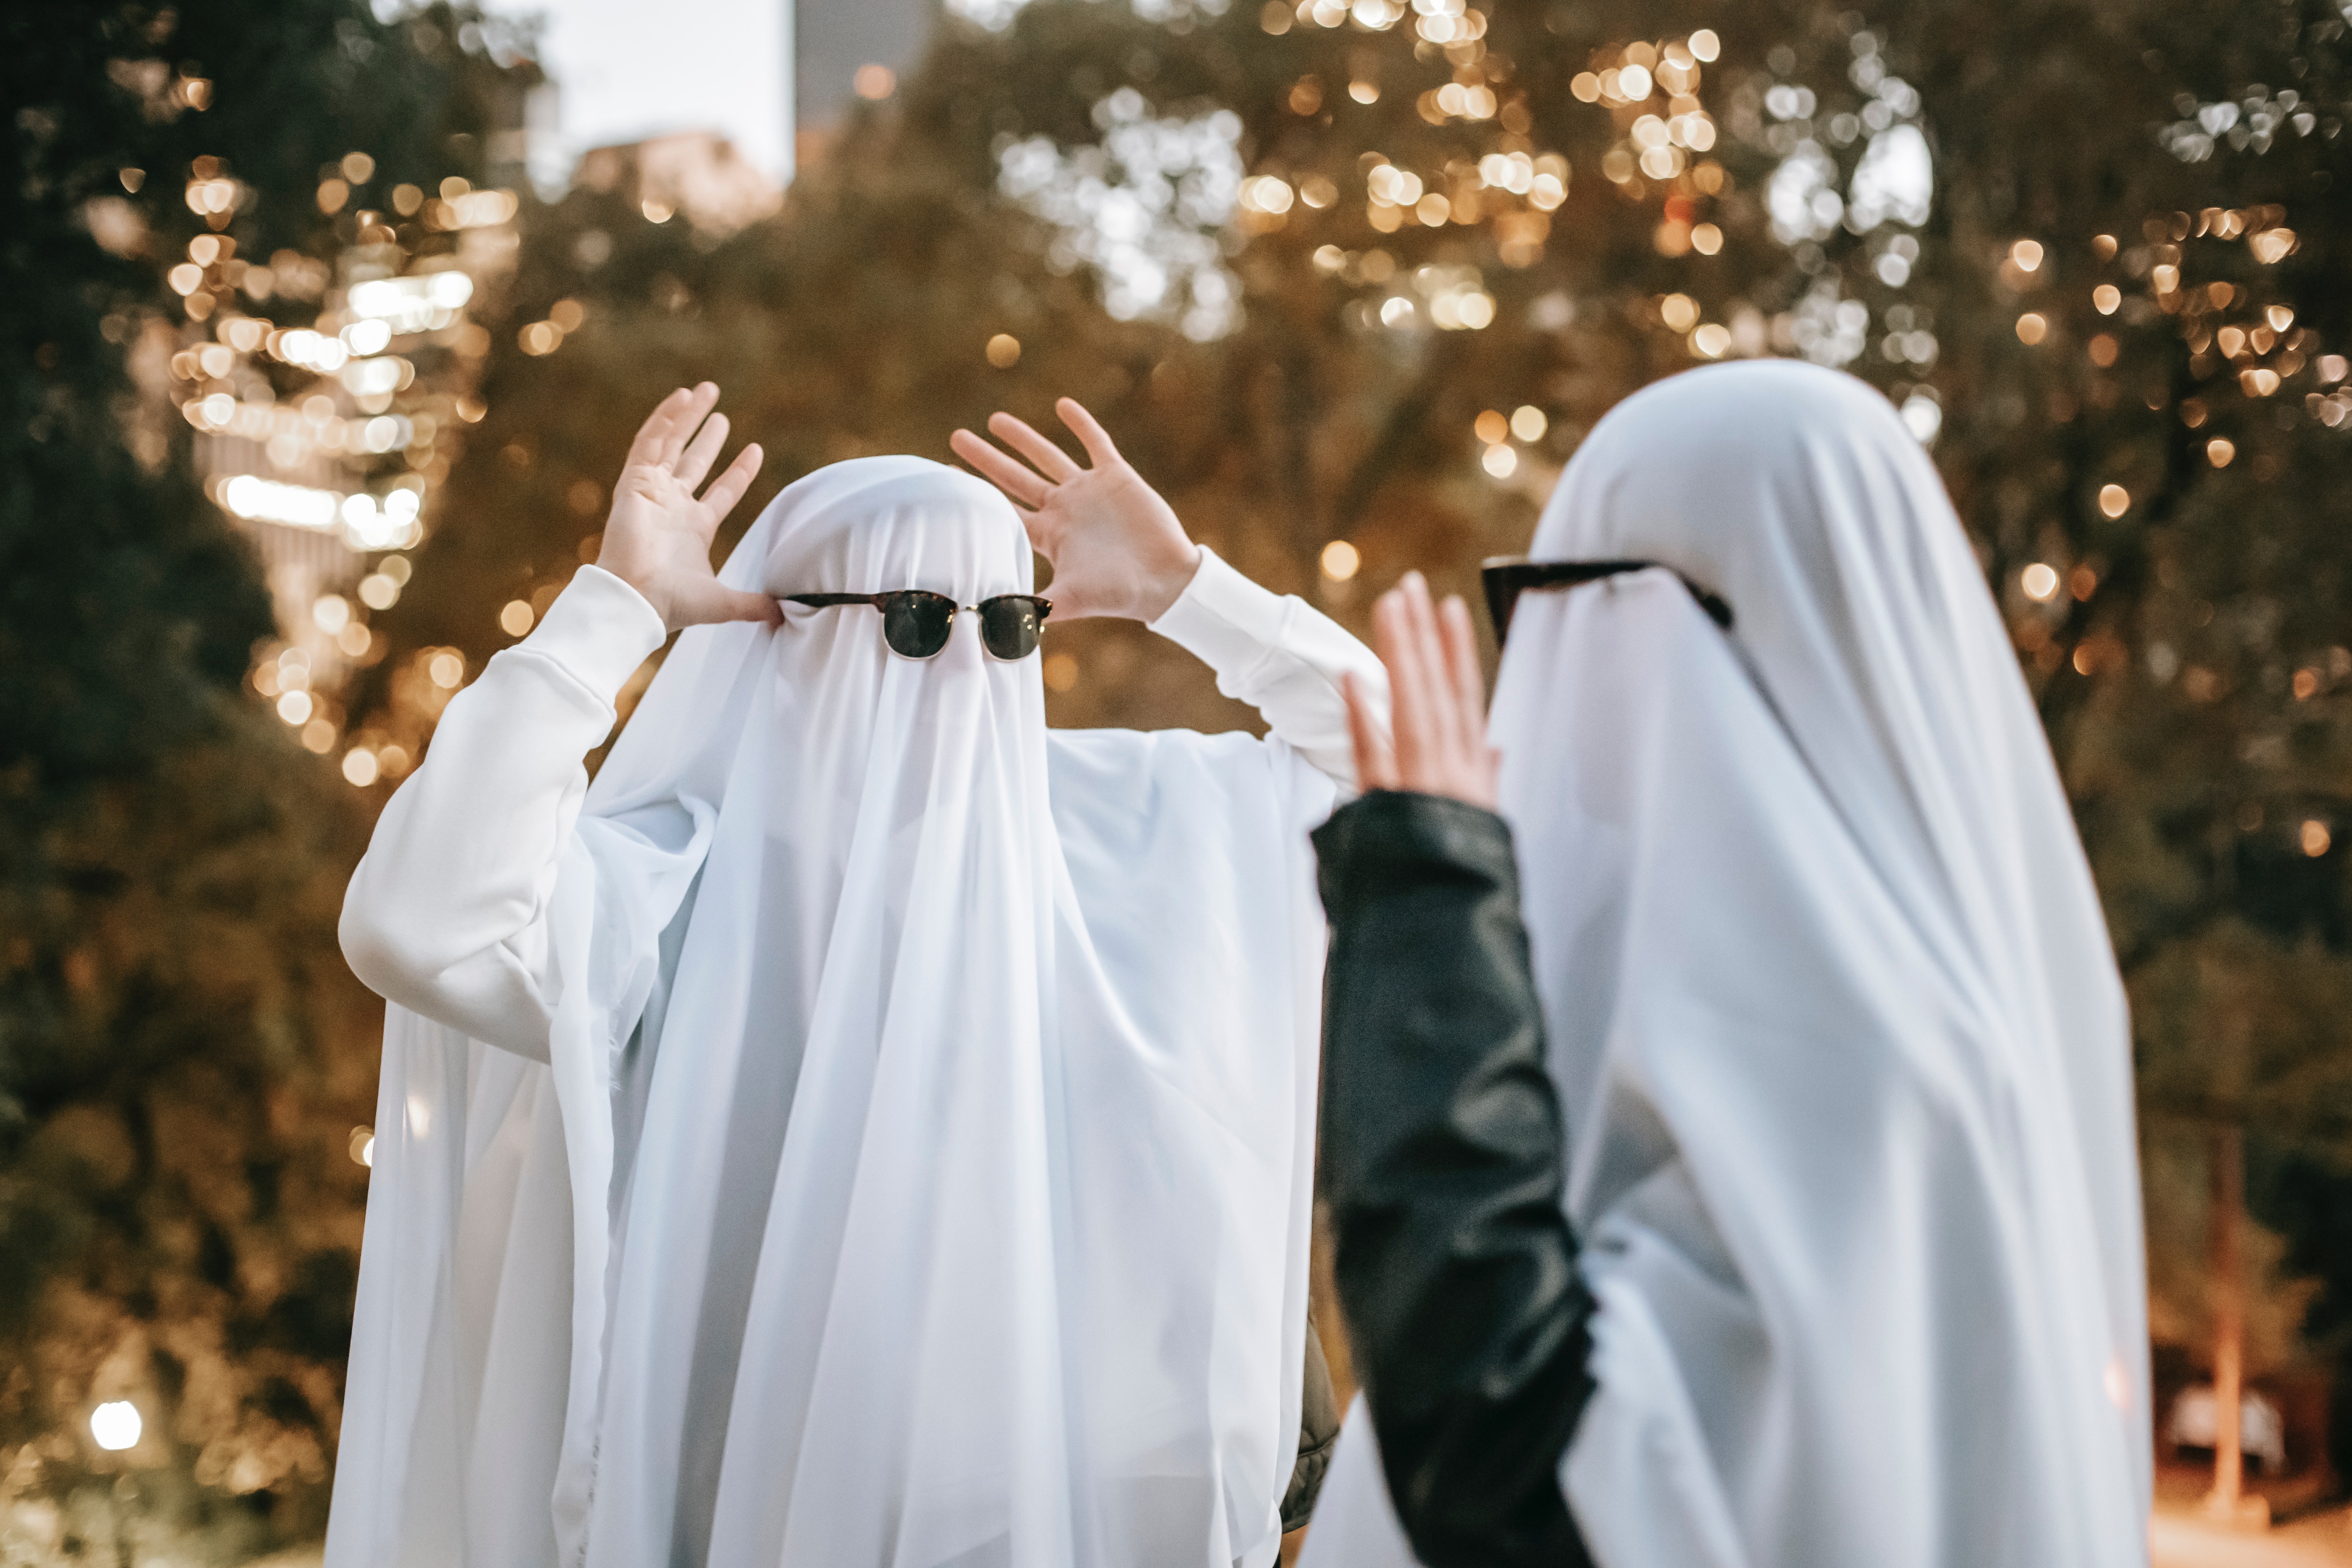 A couple having fun in ghost costumes. | Source: Pexels